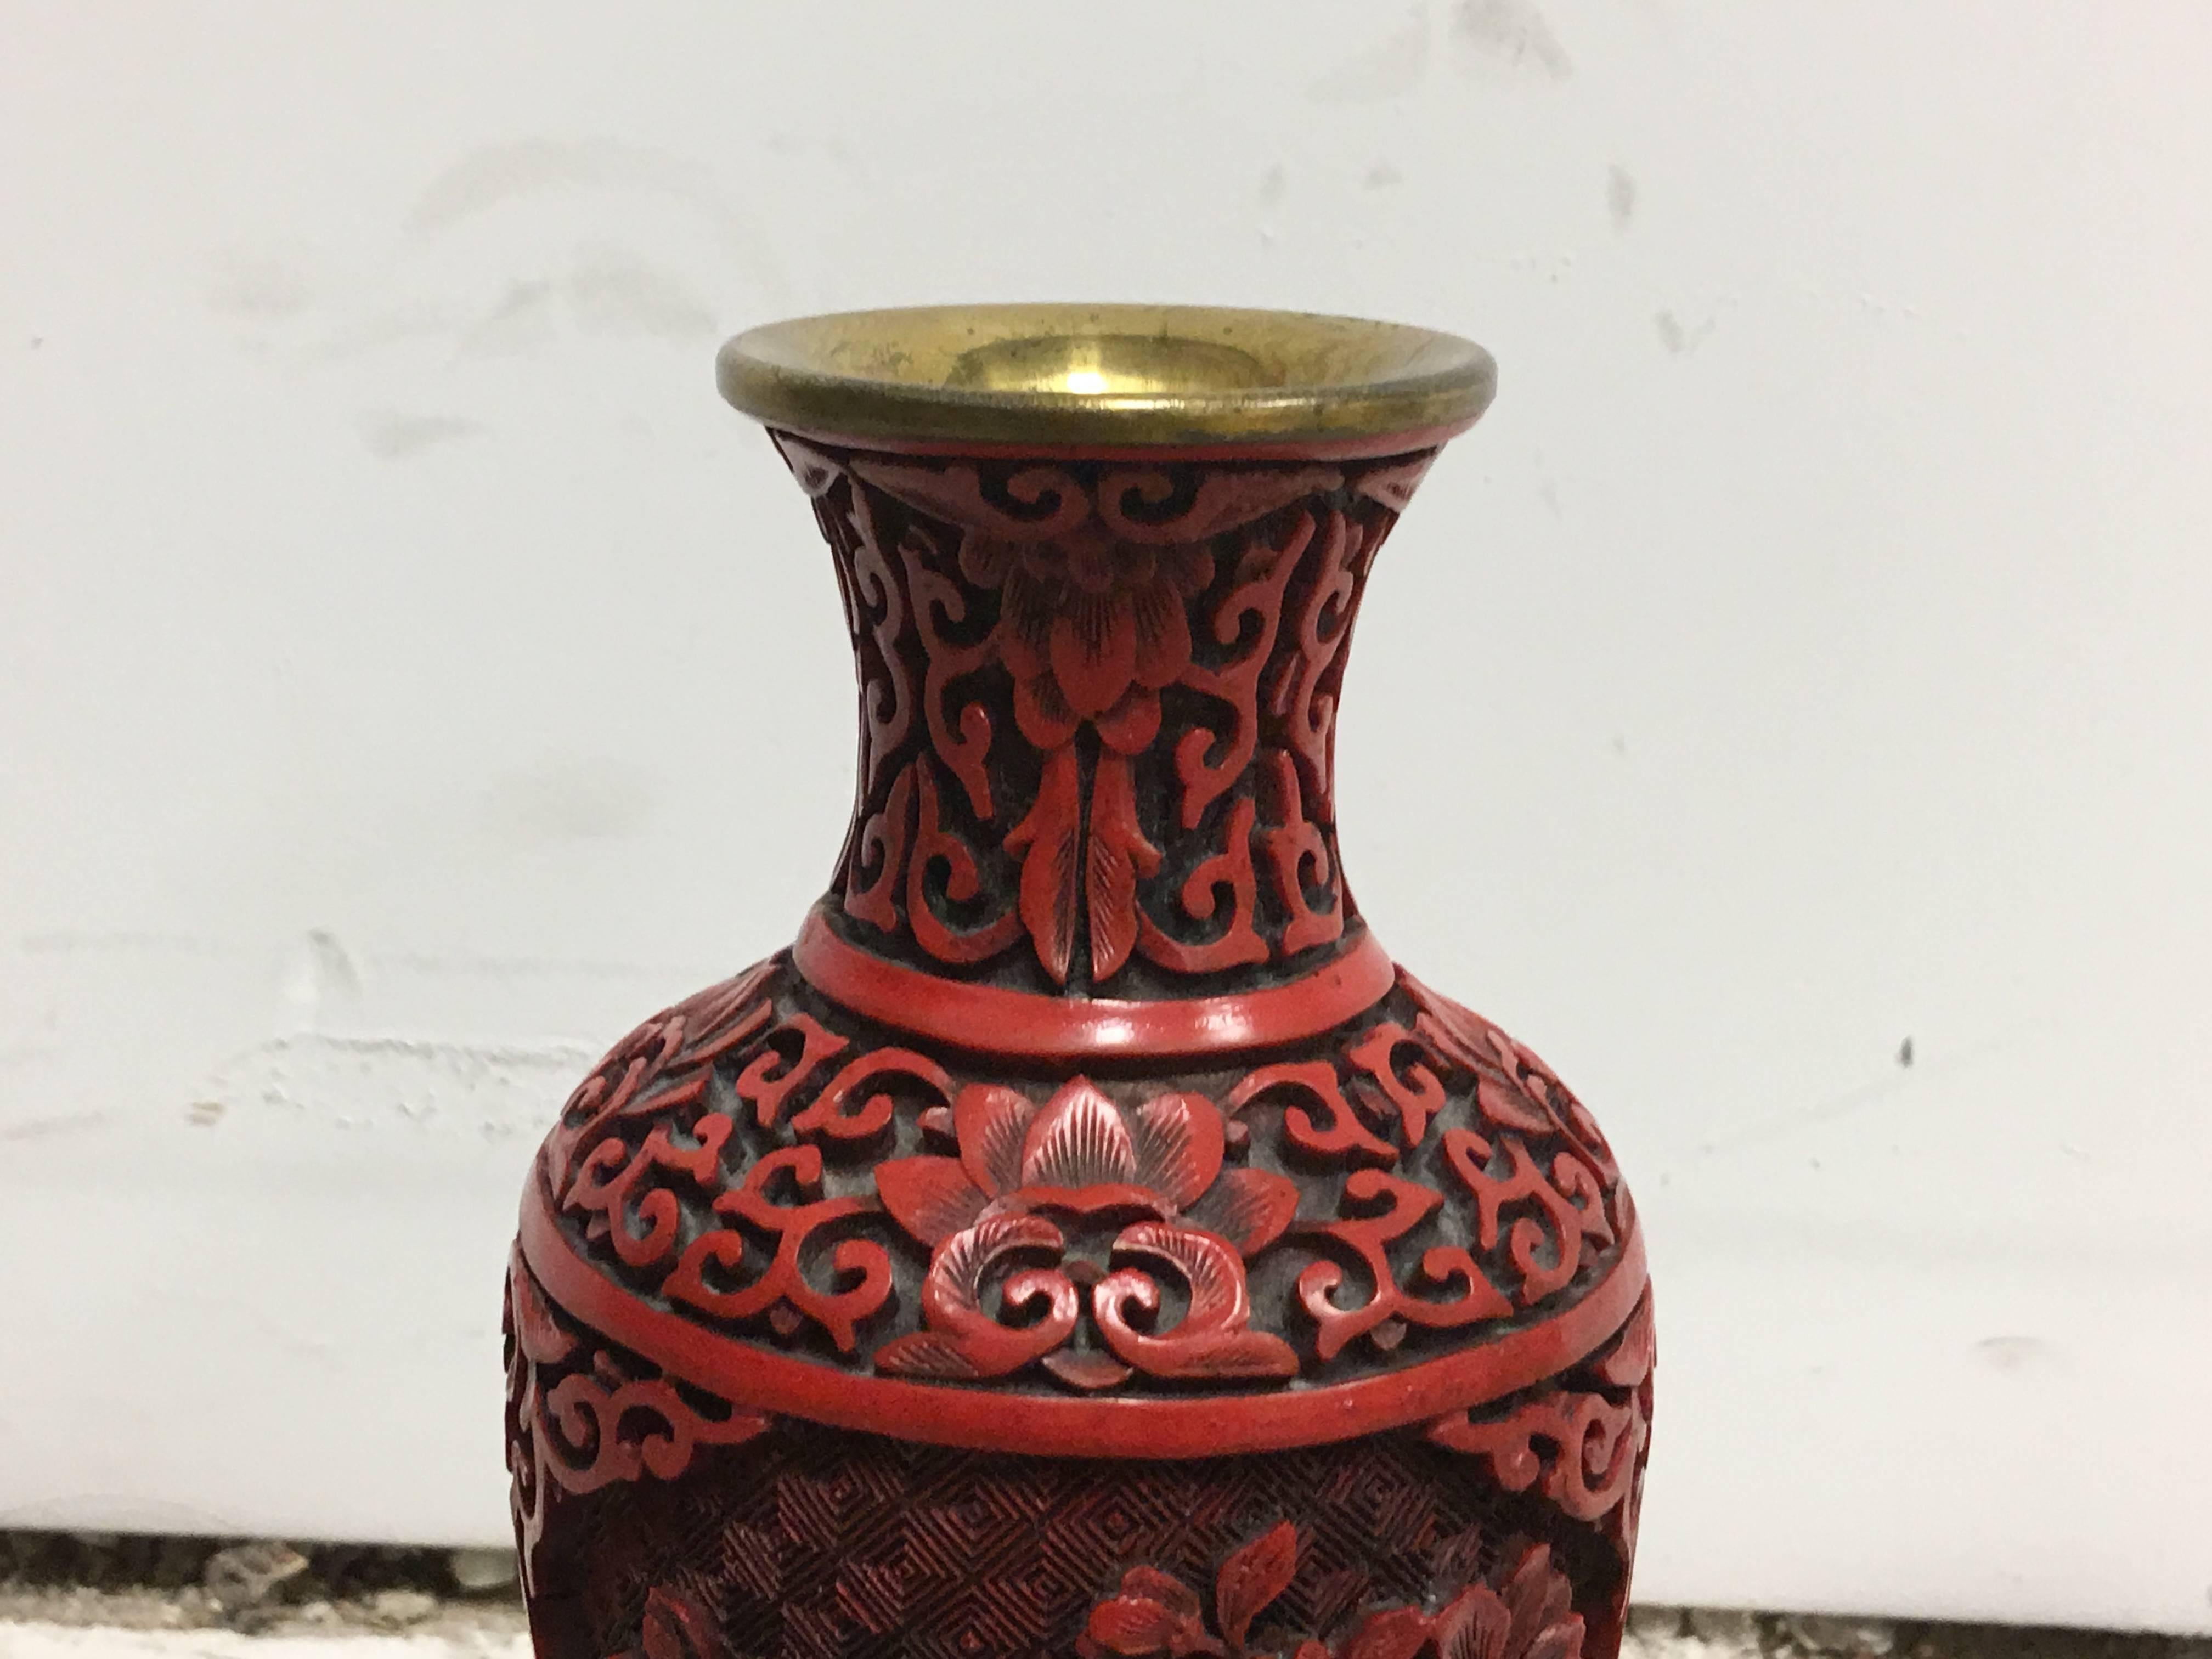 Offered is an elegant, 19th century red Chinese cinnabar cloisonné vase on ornate wood stand.